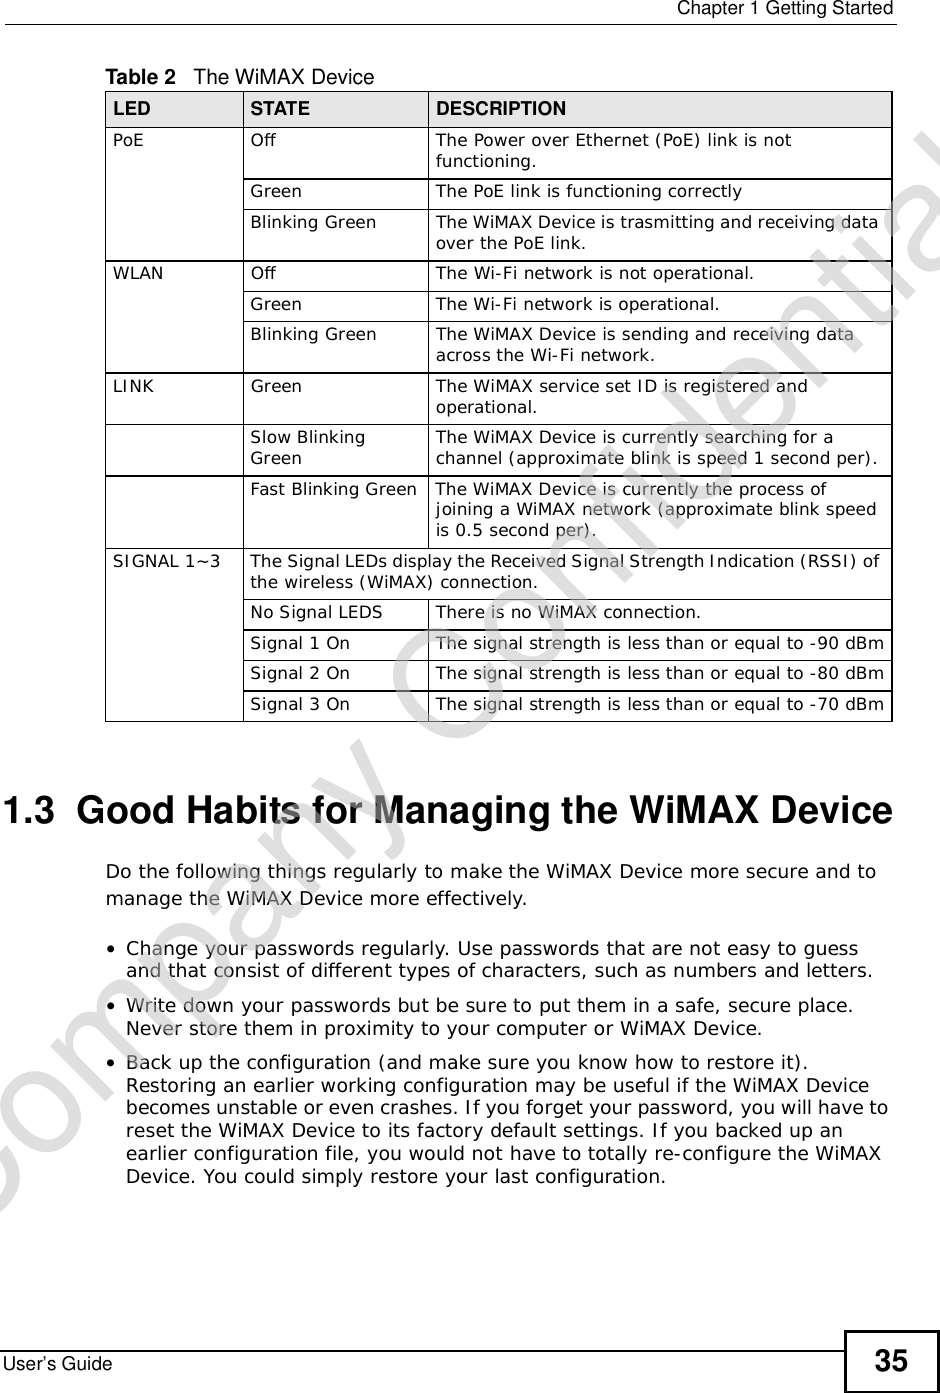  Chapter 1Getting StartedUser’s Guide 351.3  Good Habits for Managing the WiMAX DeviceDo the following things regularly to make the WiMAX Device more secure and to manage the WiMAX Device more effectively.•Change your passwords regularly. Use passwords that are not easy to guess and that consist of different types of characters, such as numbers and letters.•Write down your passwords but be sure to put them in a safe, secure place. Never store them in proximity to your computer or WiMAX Device.•Back up the configuration (and make sure you know how to restore it). Restoring an earlier working configuration may be useful if the WiMAX Device becomes unstable or even crashes. If you forget your password, you will have to reset the WiMAX Device to its factory default settings. If you backed up an earlier configuration file, you would not have to totally re-configure the WiMAX Device. You could simply restore your last configuration.PoEOffThe Power over Ethernet (PoE) link is not functioning.GreenThe PoE link is functioning correctlyBlinking GreenThe WiMAX Device is trasmitting and receiving data over the PoE link.WLANOffThe Wi-Fi network is not operational.GreenThe Wi-Fi network is operational.Blinking GreenThe WiMAX Device is sending and receiving data across the Wi-Fi network.LINKGreenThe WiMAX service set ID is registered and operational.Slow Blinking Green The WiMAX Device is currently searching for a channel (approximate blink is speed 1 second per).Fast Blinking GreenThe WiMAX Device is currently the process of joining a WiMAX network (approximate blink speed is 0.5 second per).SIGNAL 1~3The Signal LEDs display the Received Signal Strength Indication (RSSI) of the wireless (WiMAX) connection.No Signal LEDSThere is no WiMAX connection.Signal 1 OnThe signal strength is less than or equal to -90 dBmSignal 2 OnThe signal strength is less than or equal to -80 dBmSignal 3 OnThe signal strength is less than or equal to -70 dBmTable 2   The WiMAX DeviceLED STATE DESCRIPTIONCompany Confidential